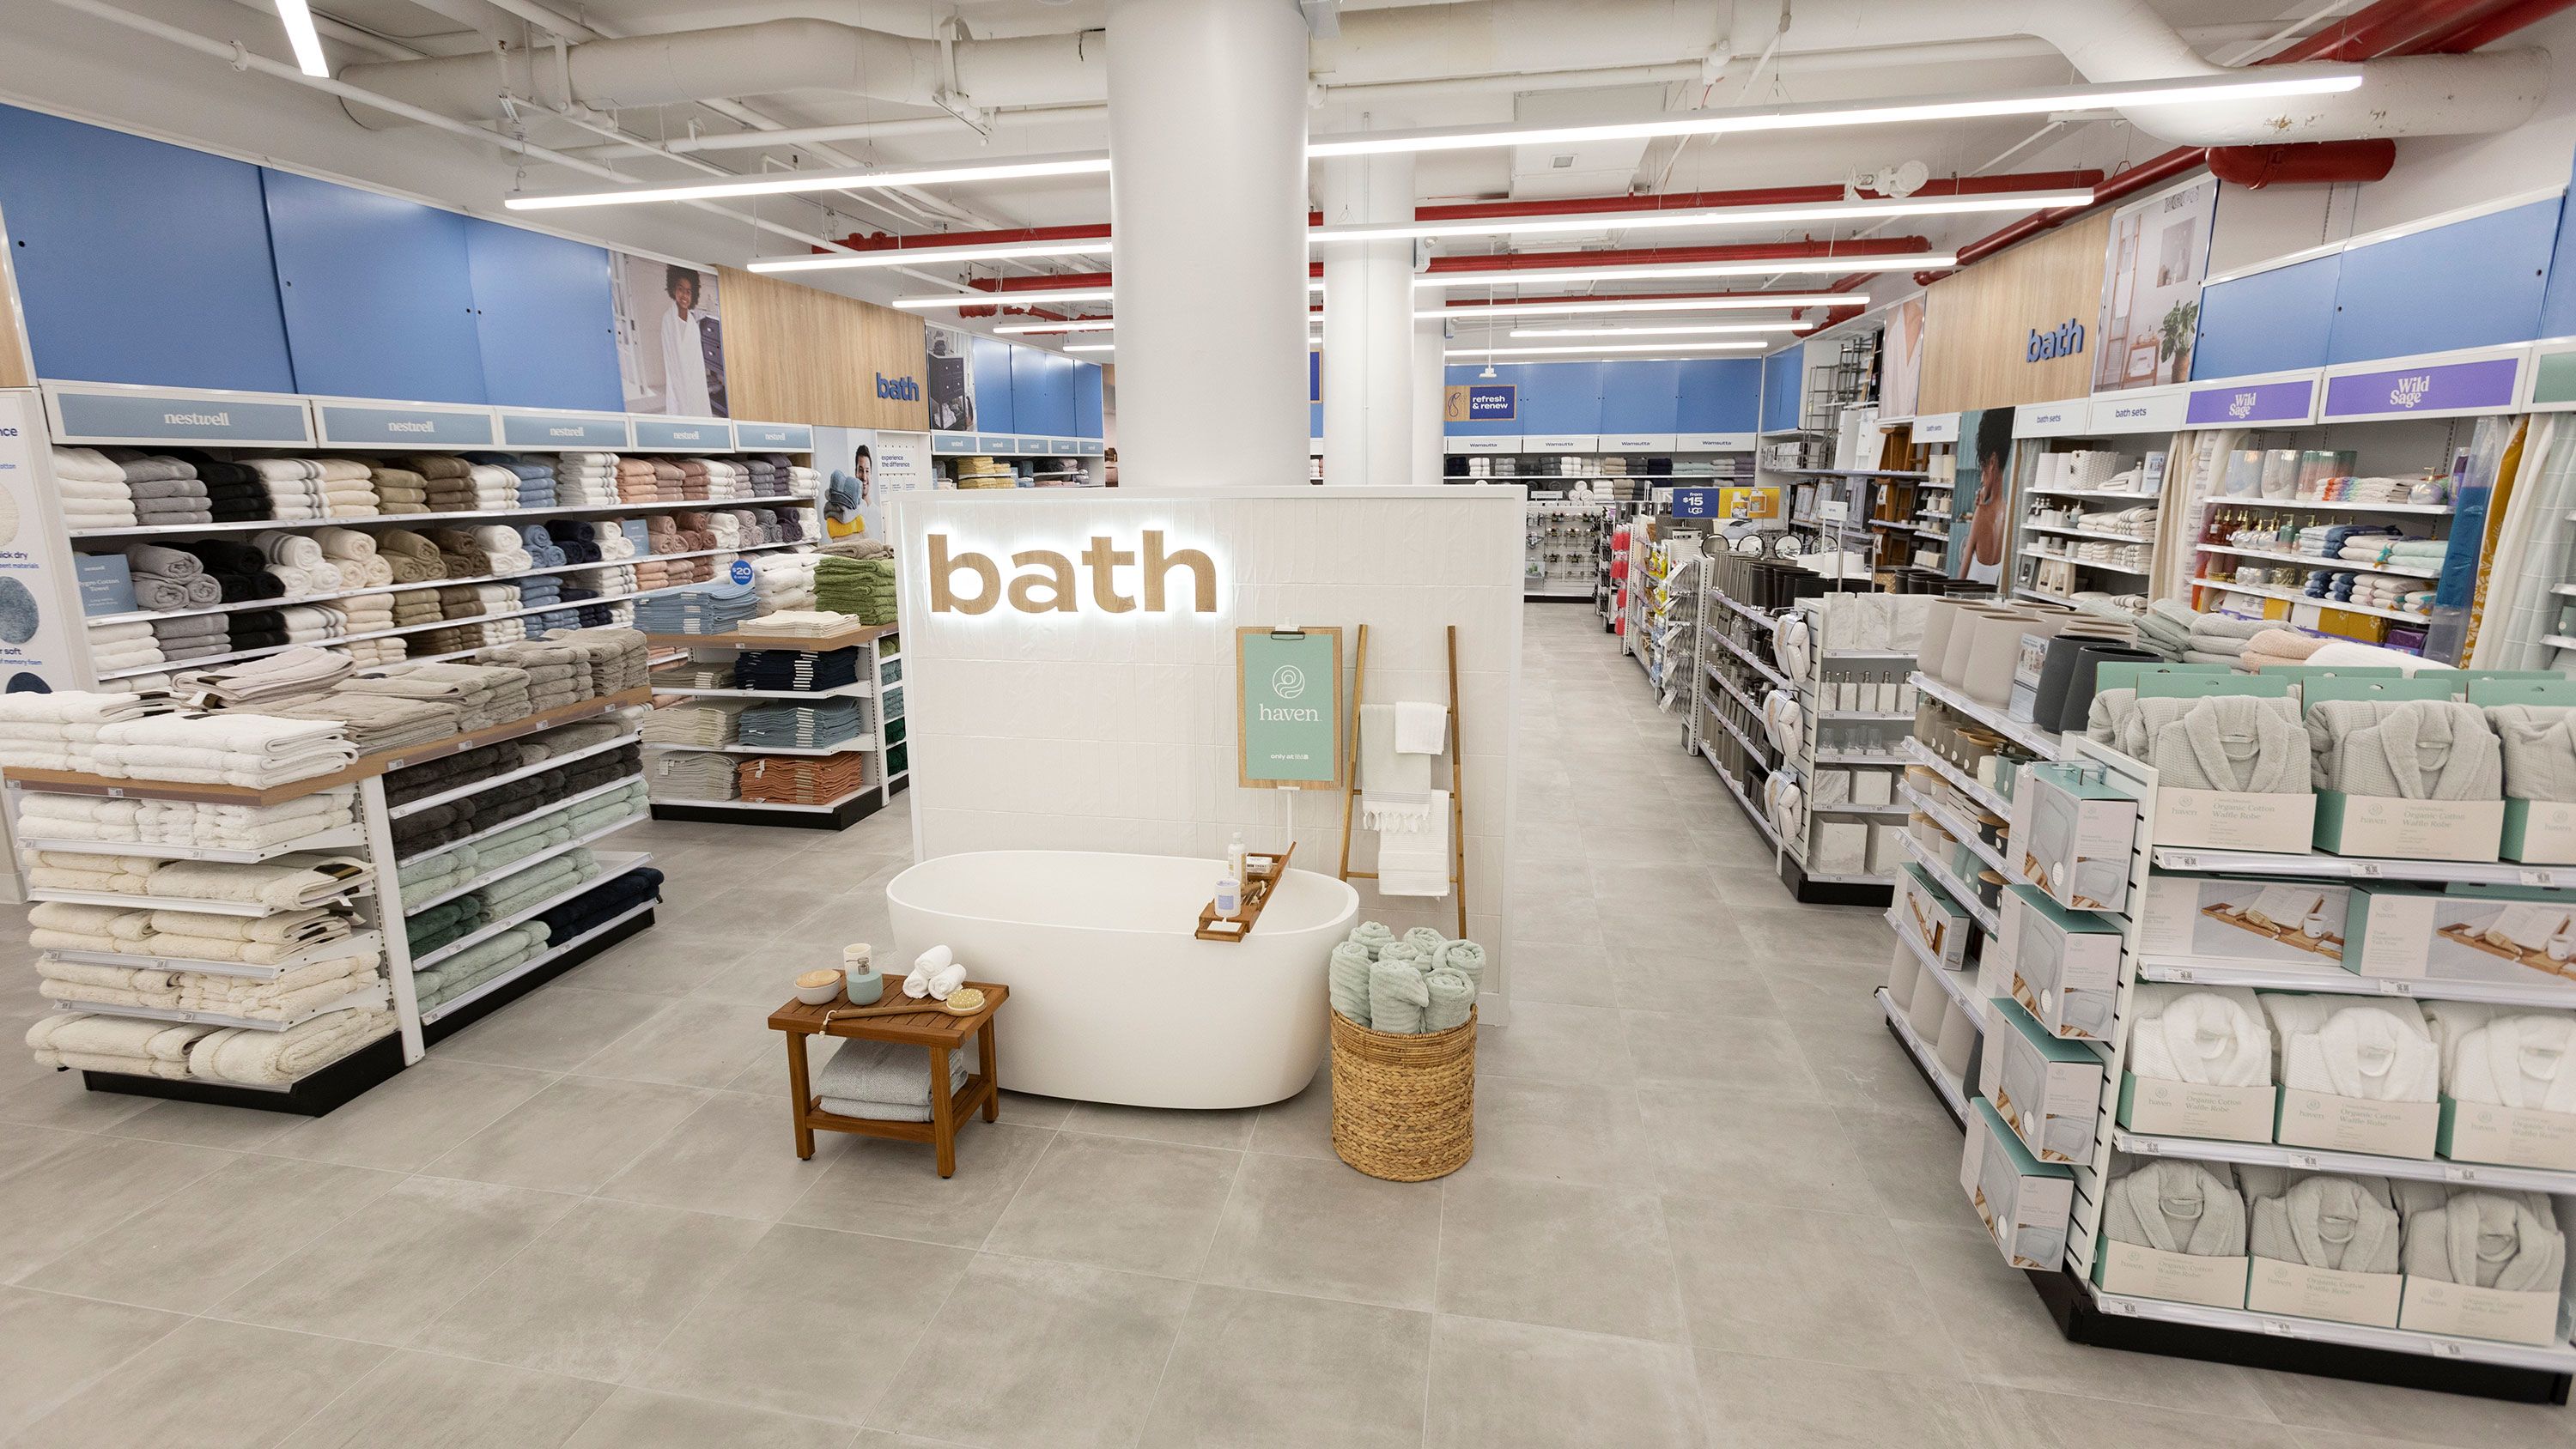 Bed Bath & Beyond: What to Buy and What You Should Skip